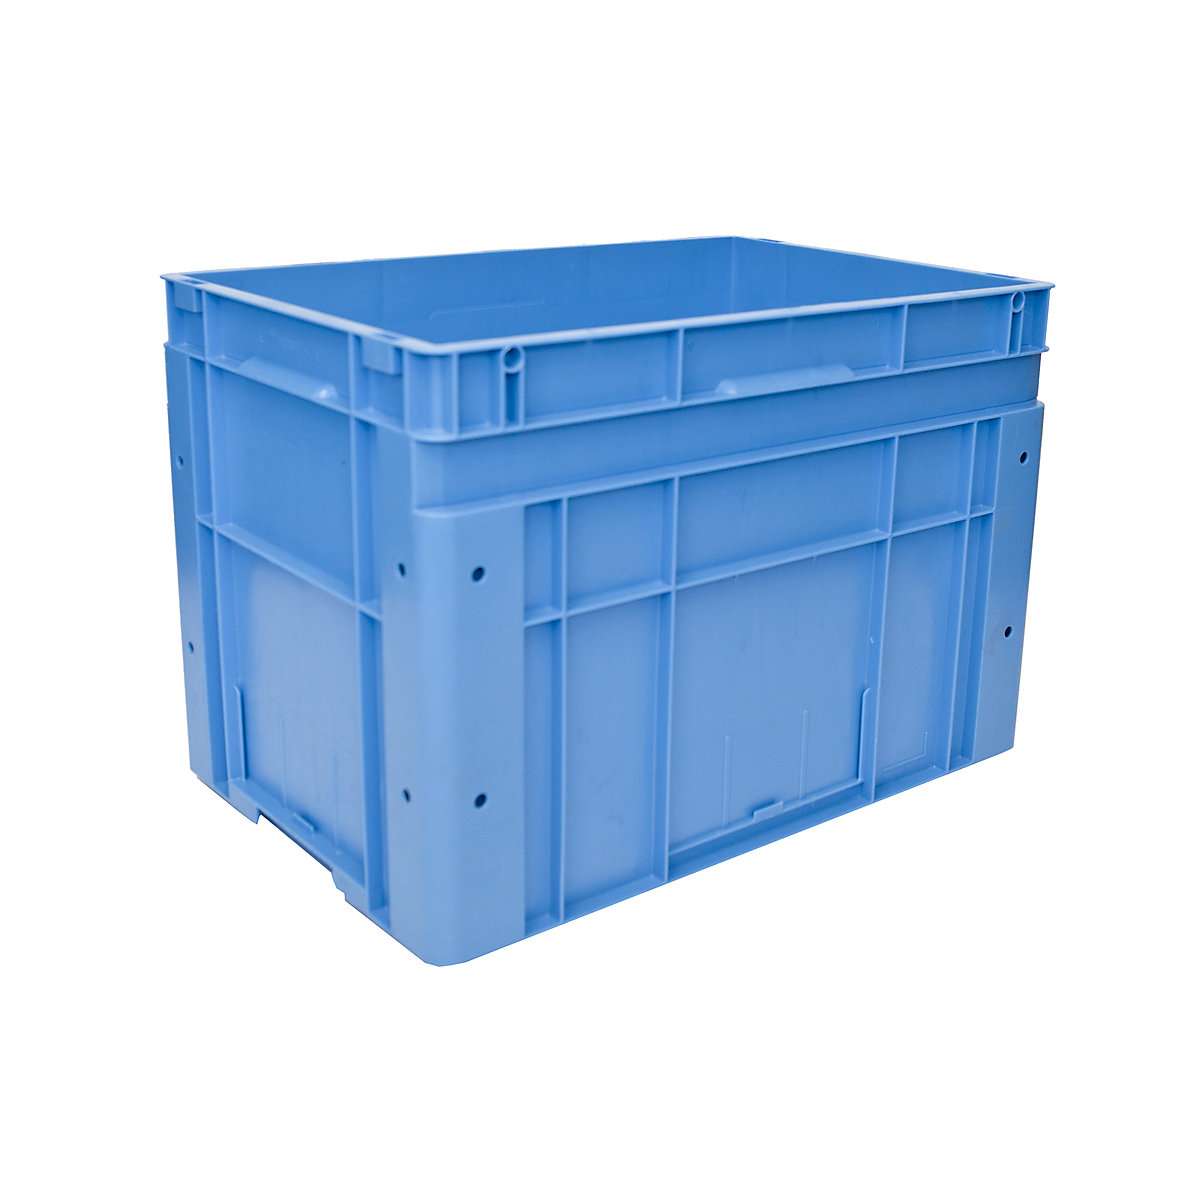 Euro size stacking containers, external LxWxH 600 x 400 x 420 mm, blue